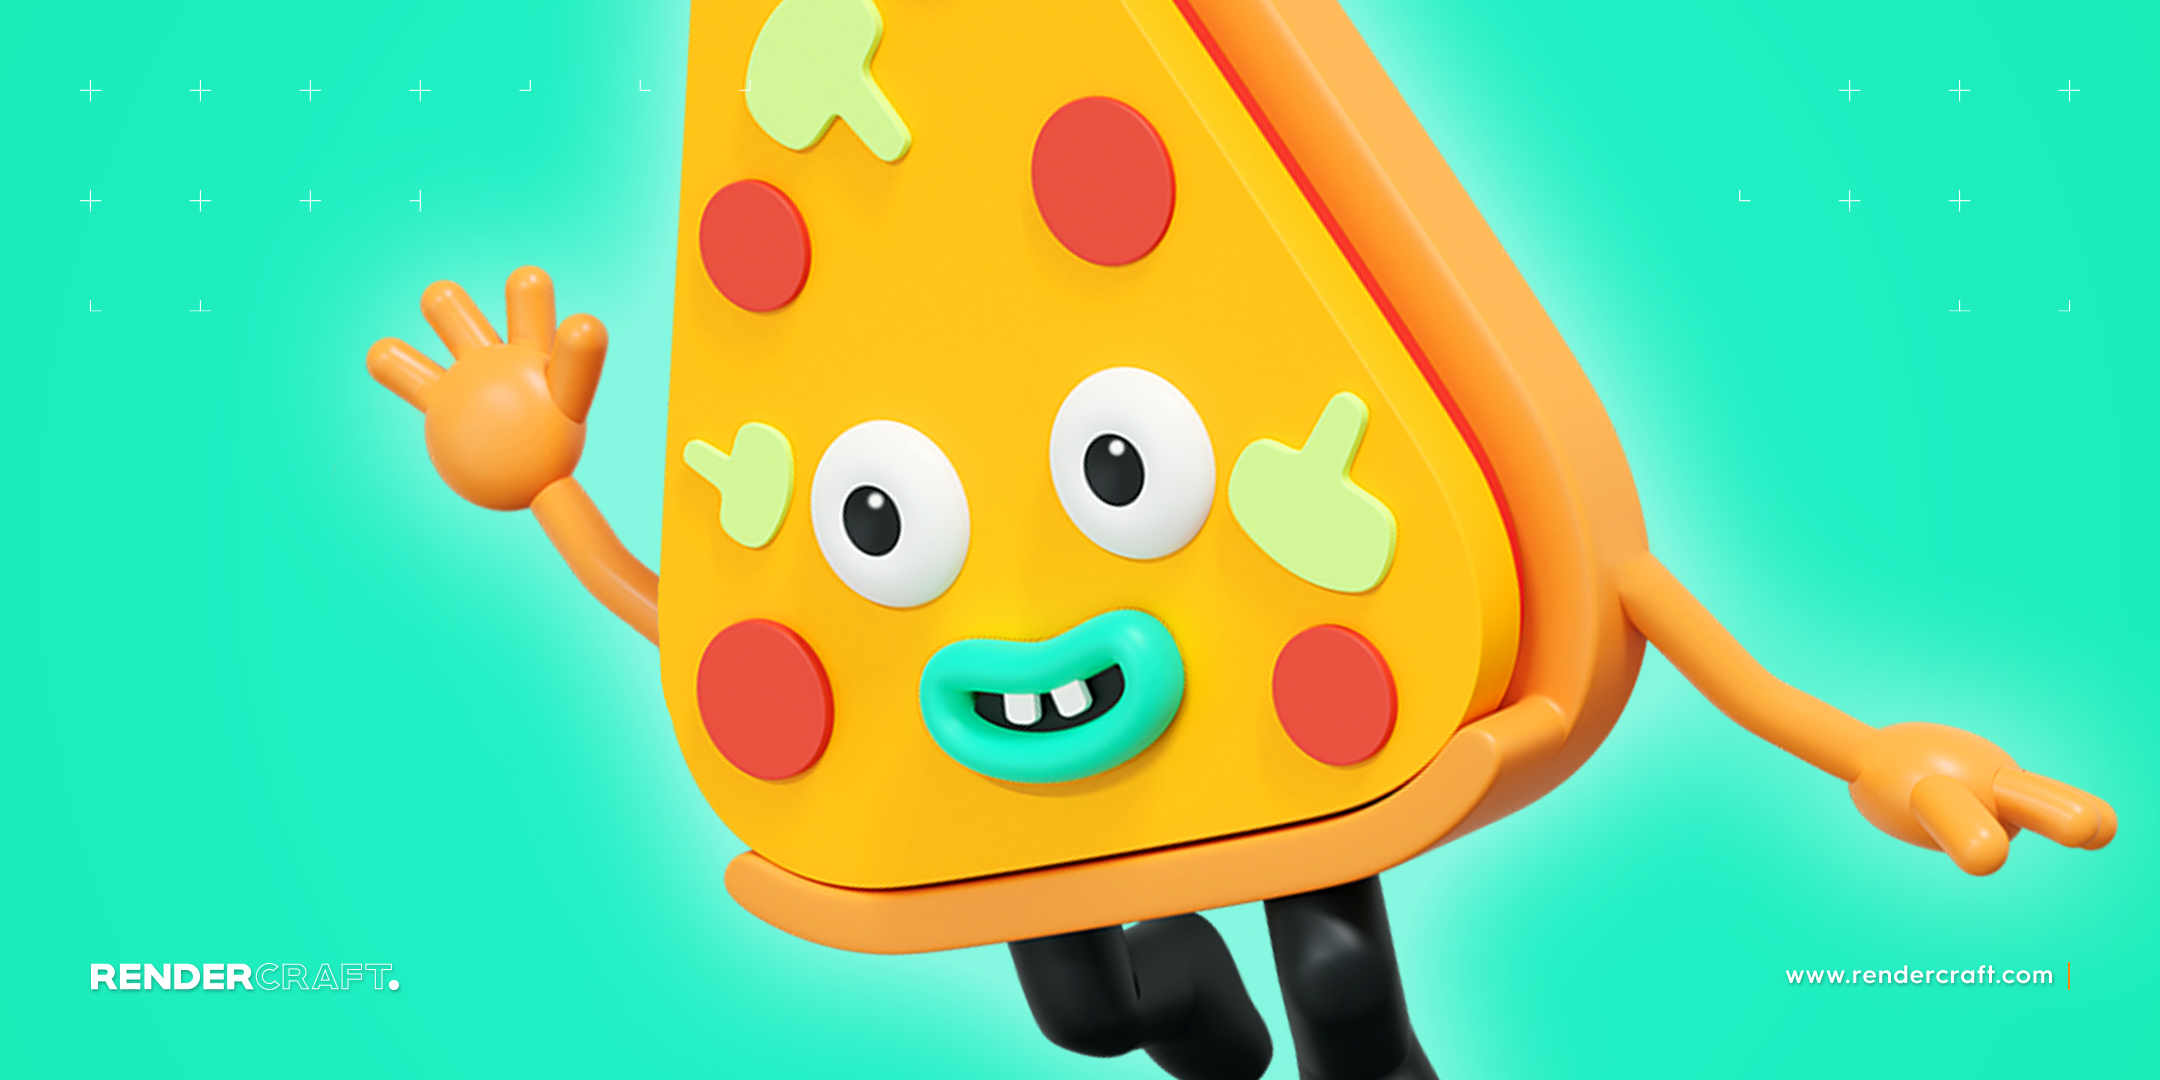 Pizza 3D Model Create and Rigg Character Blender Academy Course